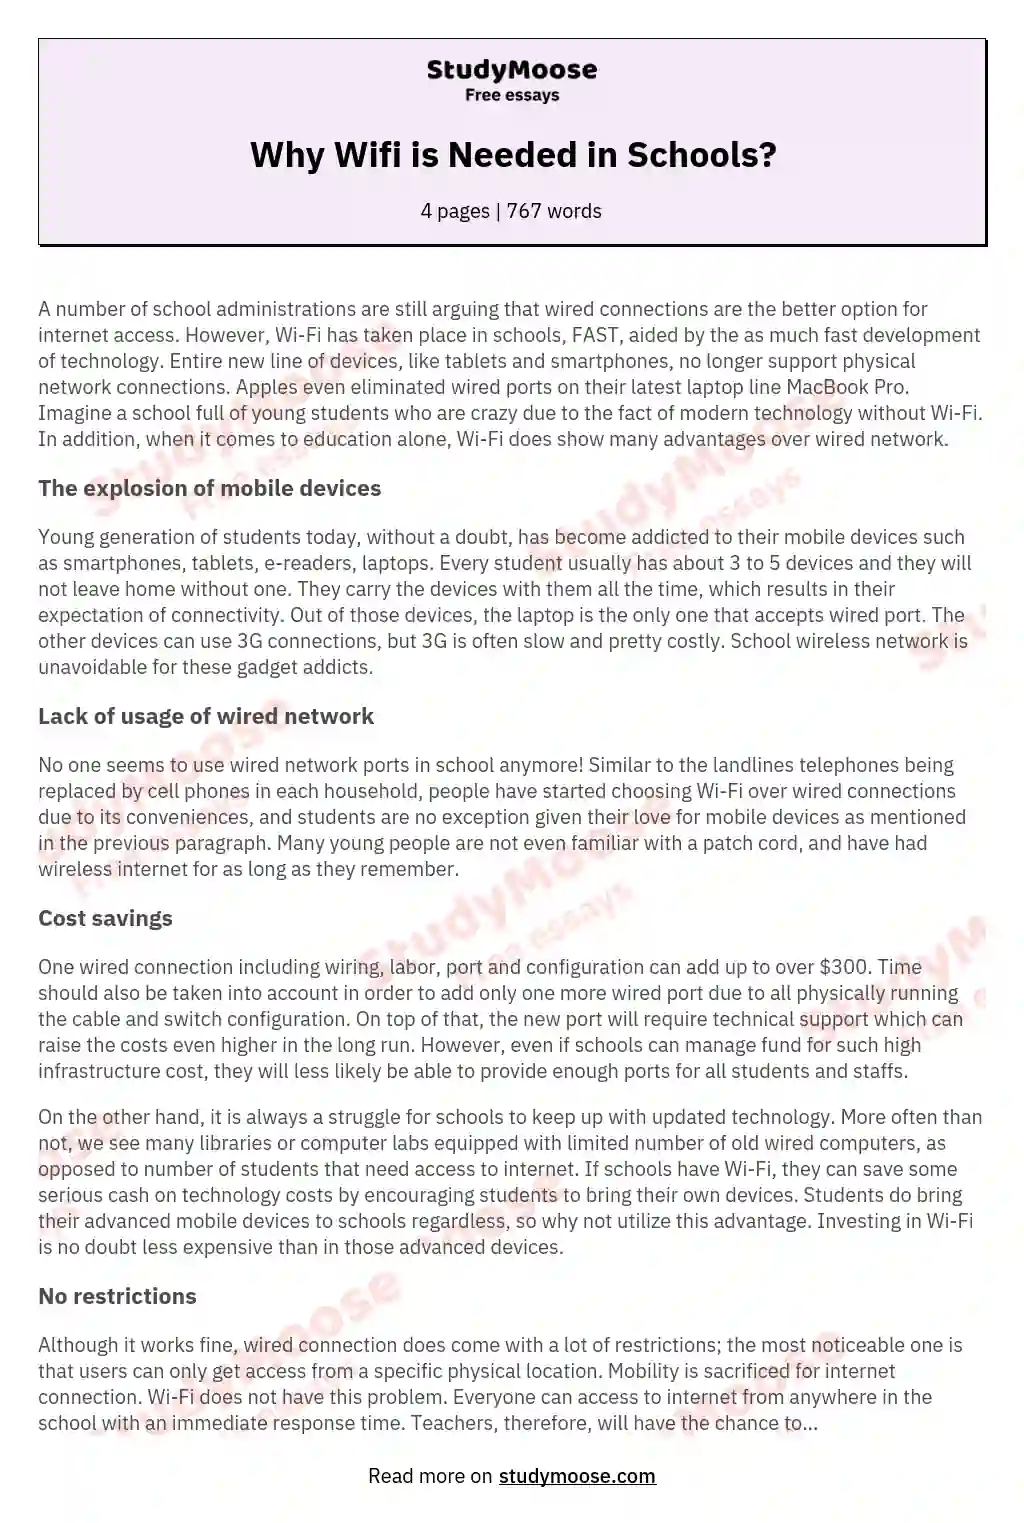 Why Wifi is Needed in Schools? essay